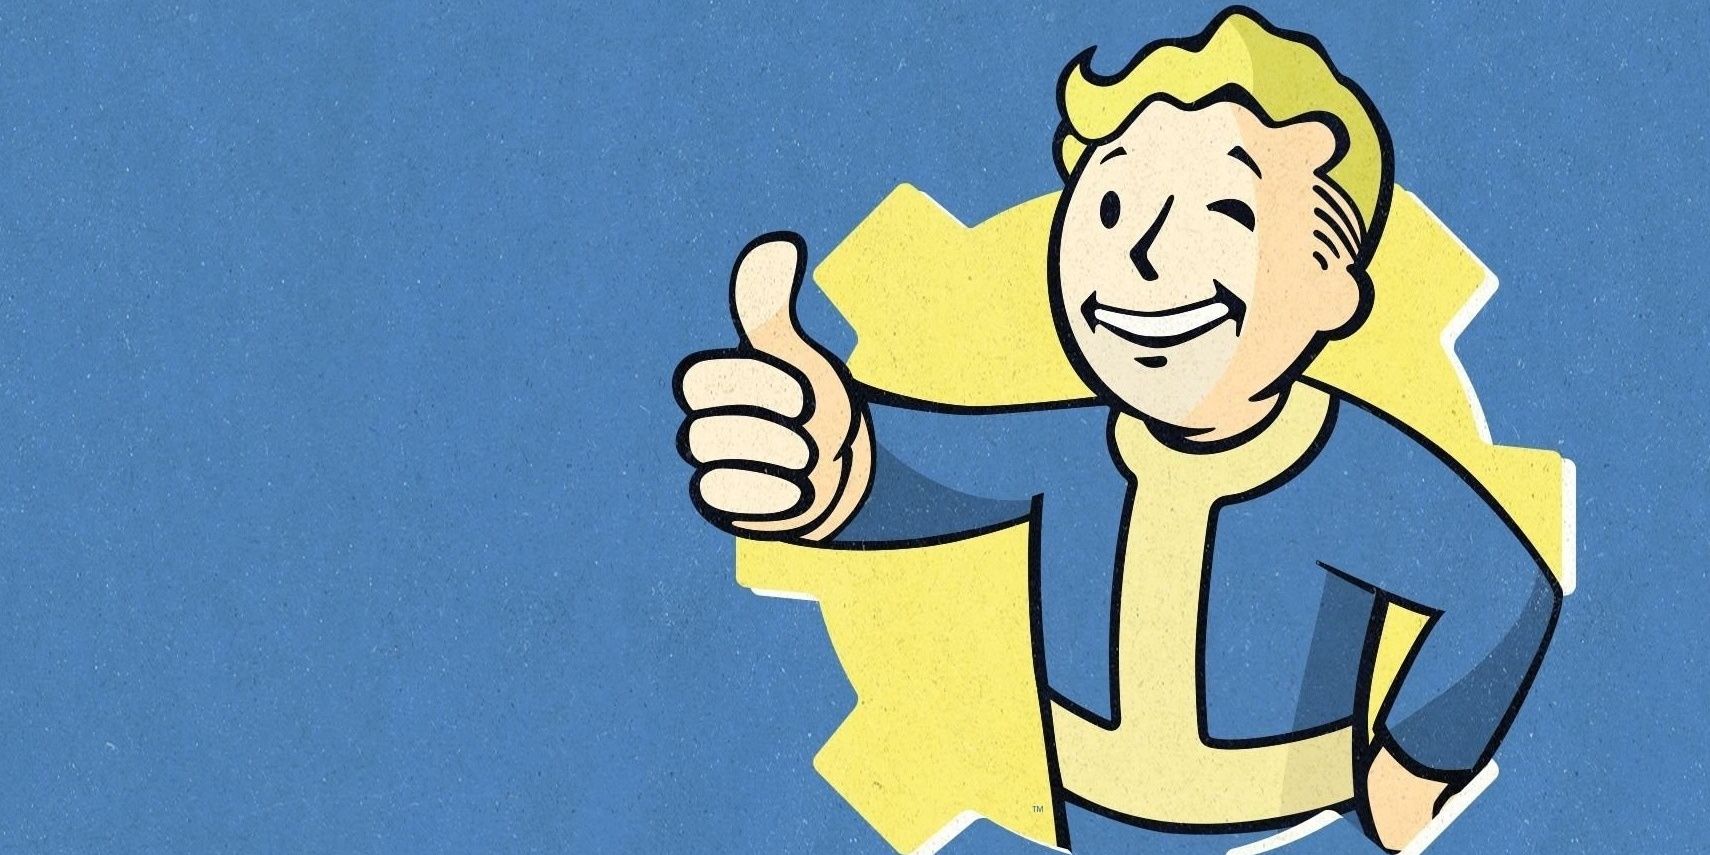 Fallout - Vault Boy Winking And Giving A Thumbs Up